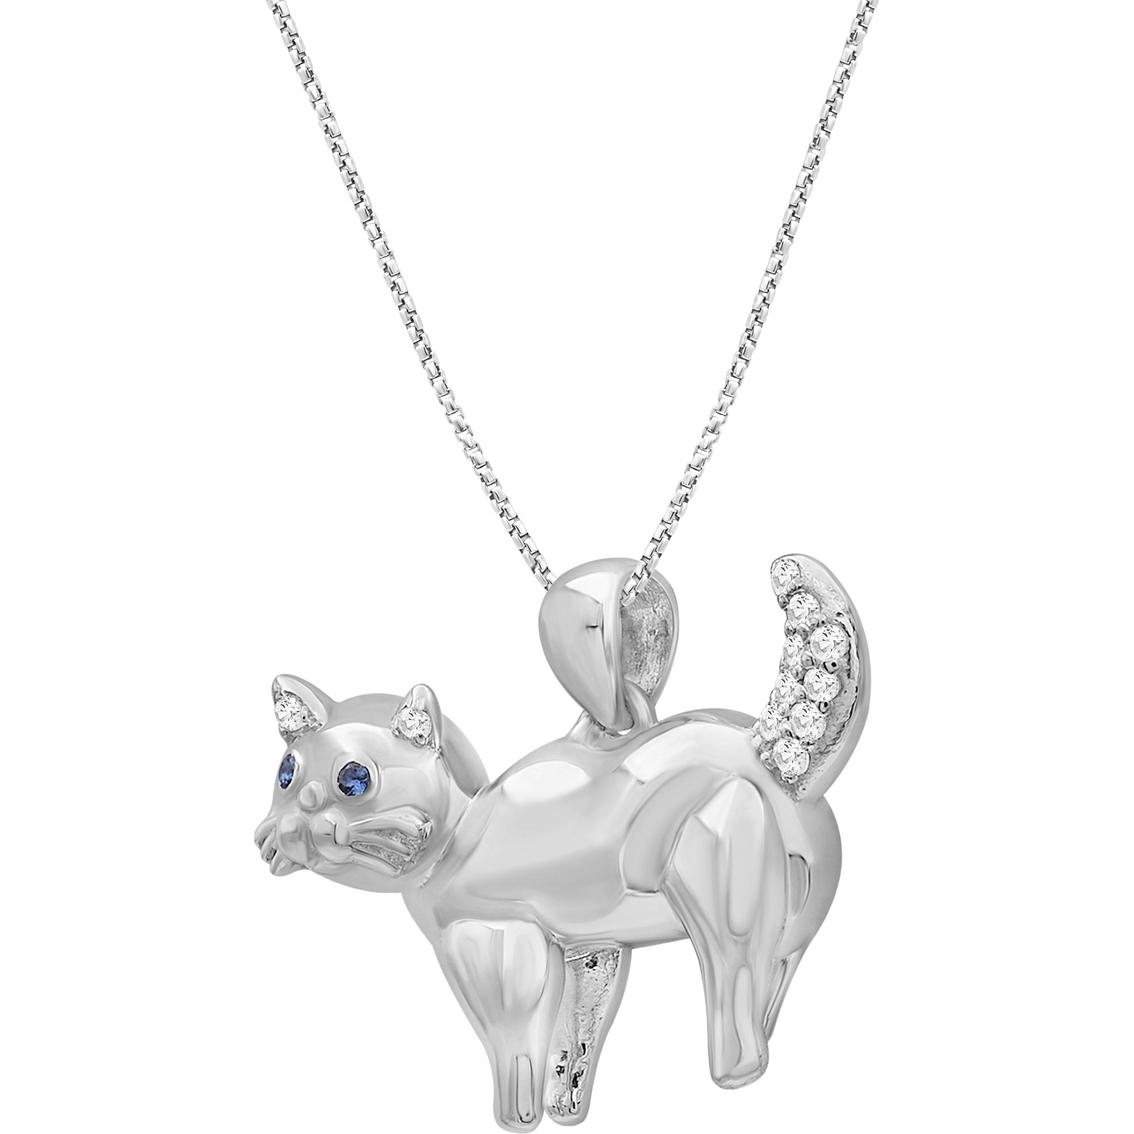 Animal's Rock Sterling Silver Diamond Accent Ragdoll Cat Pendant 18 in. - Image 2 of 4